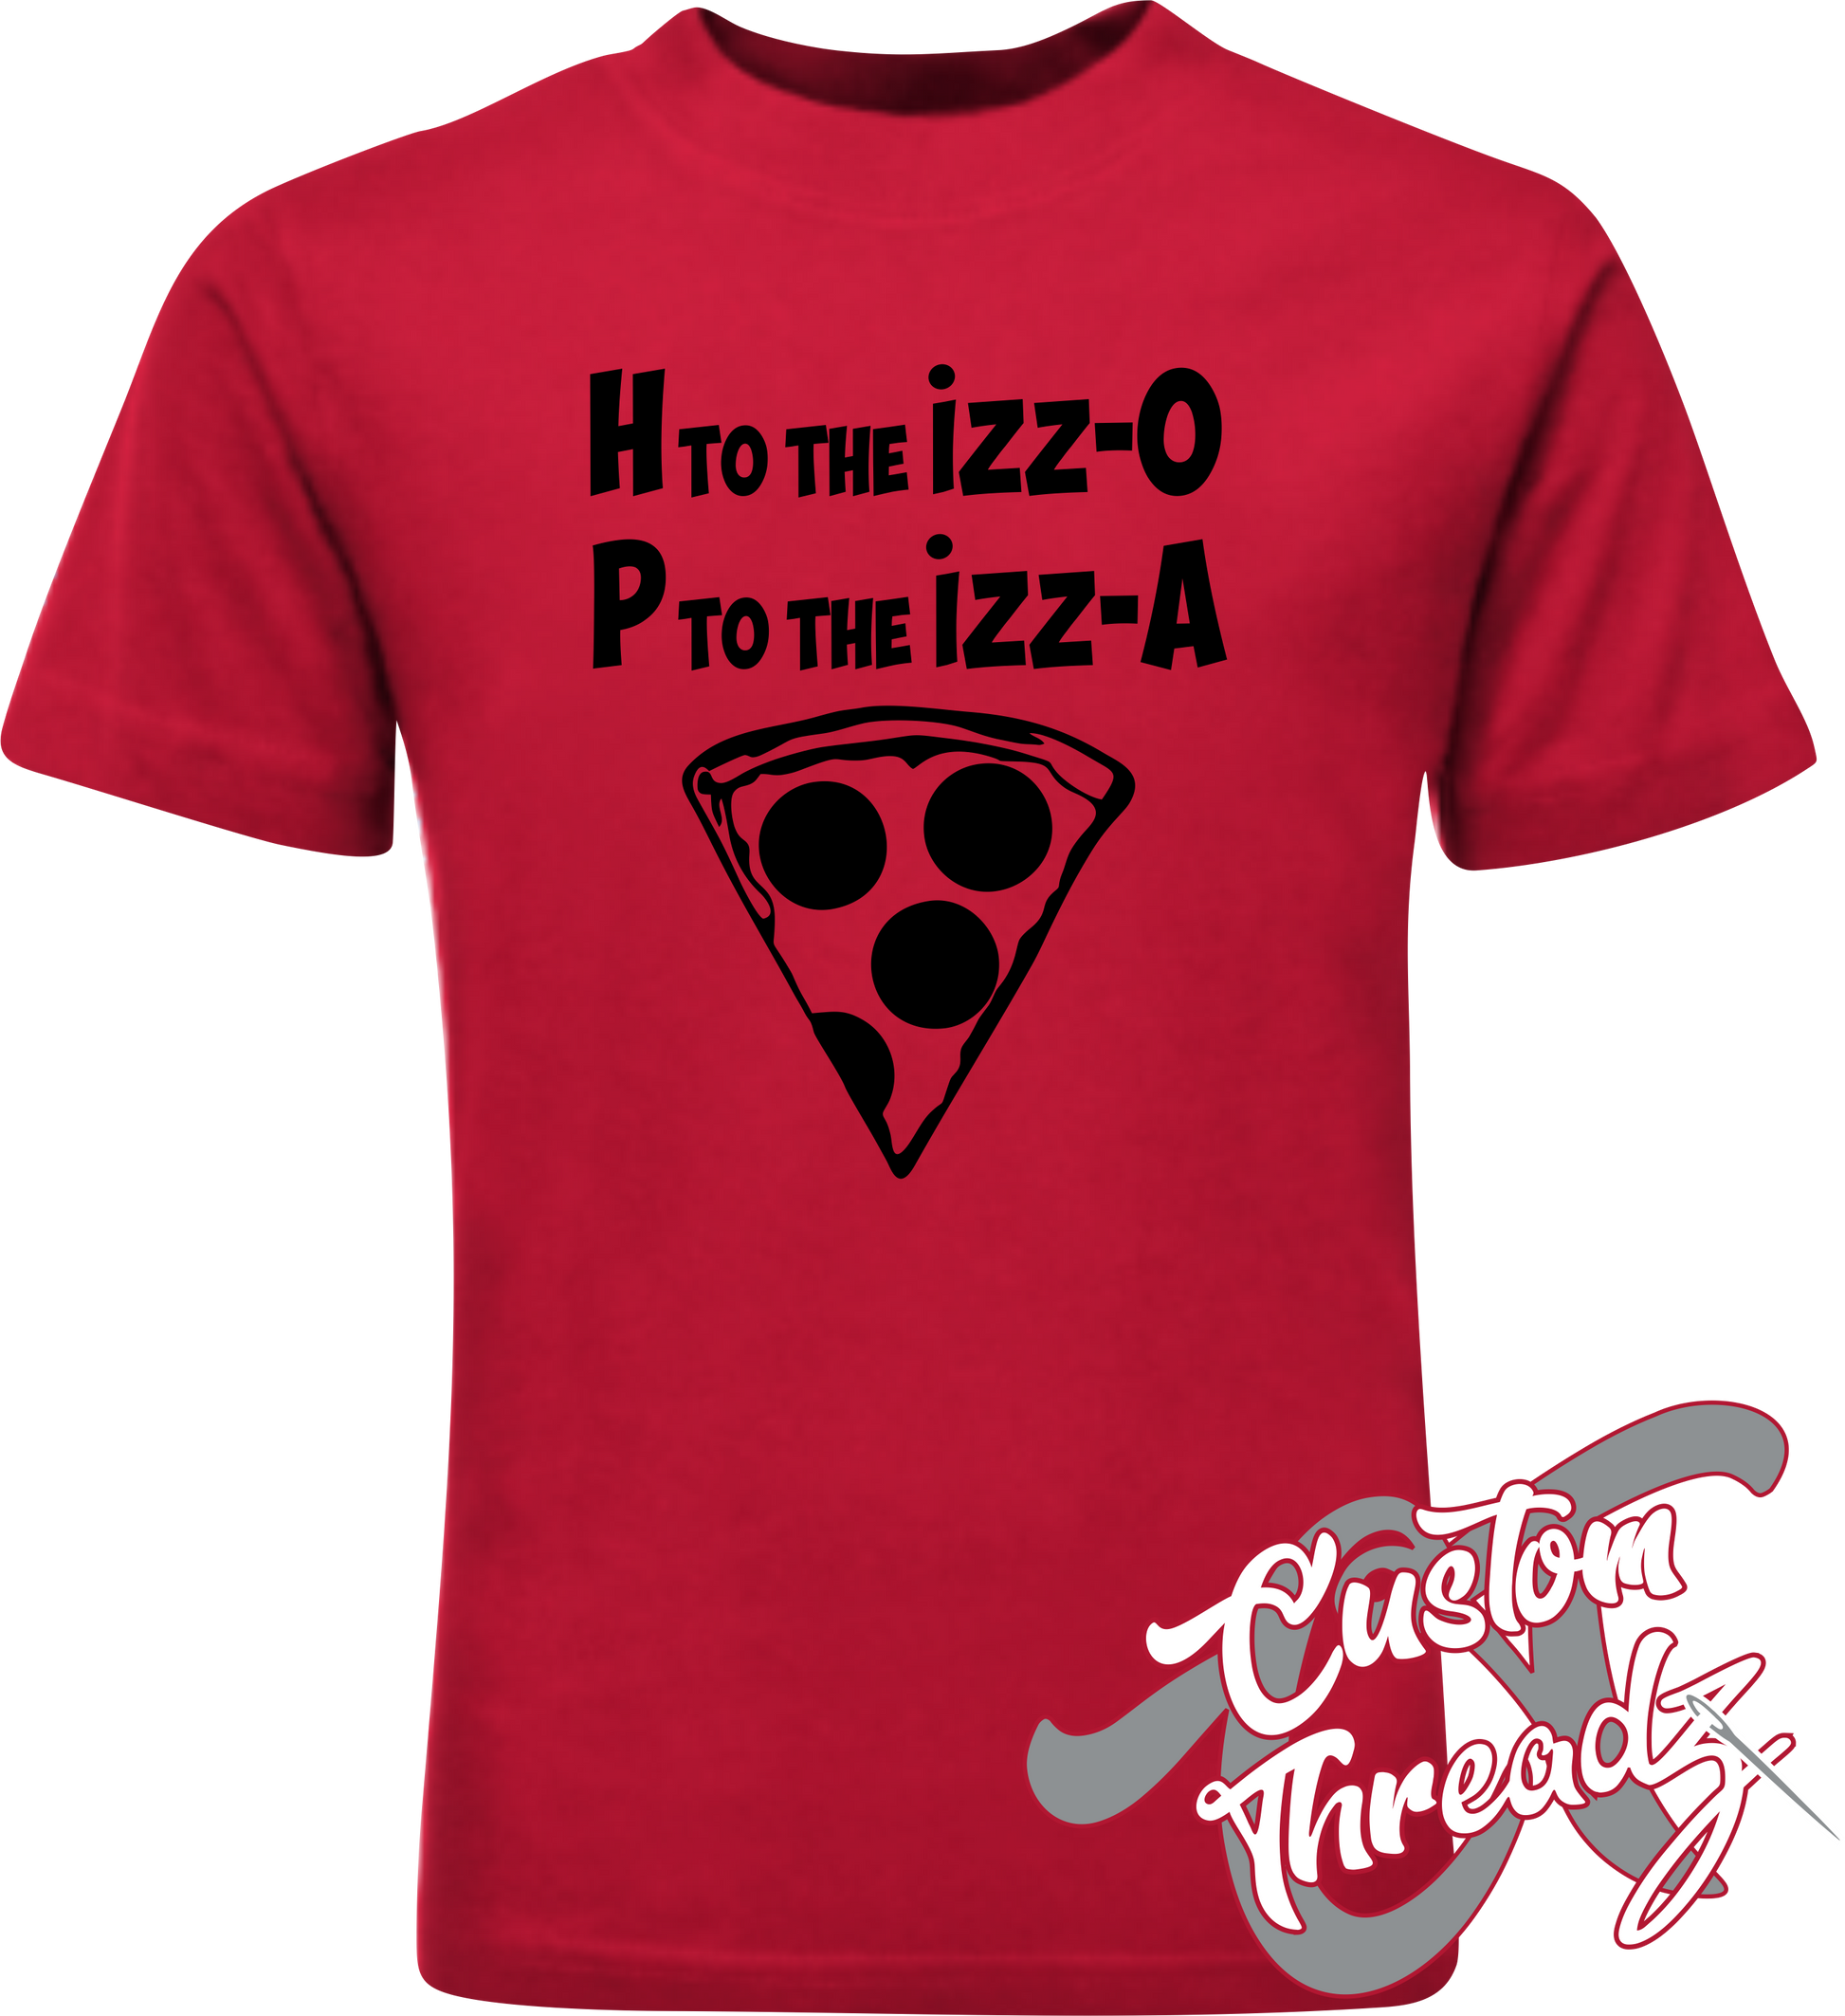 red youth tee with h to the izzo p to the izza pizza hova DTG printed design